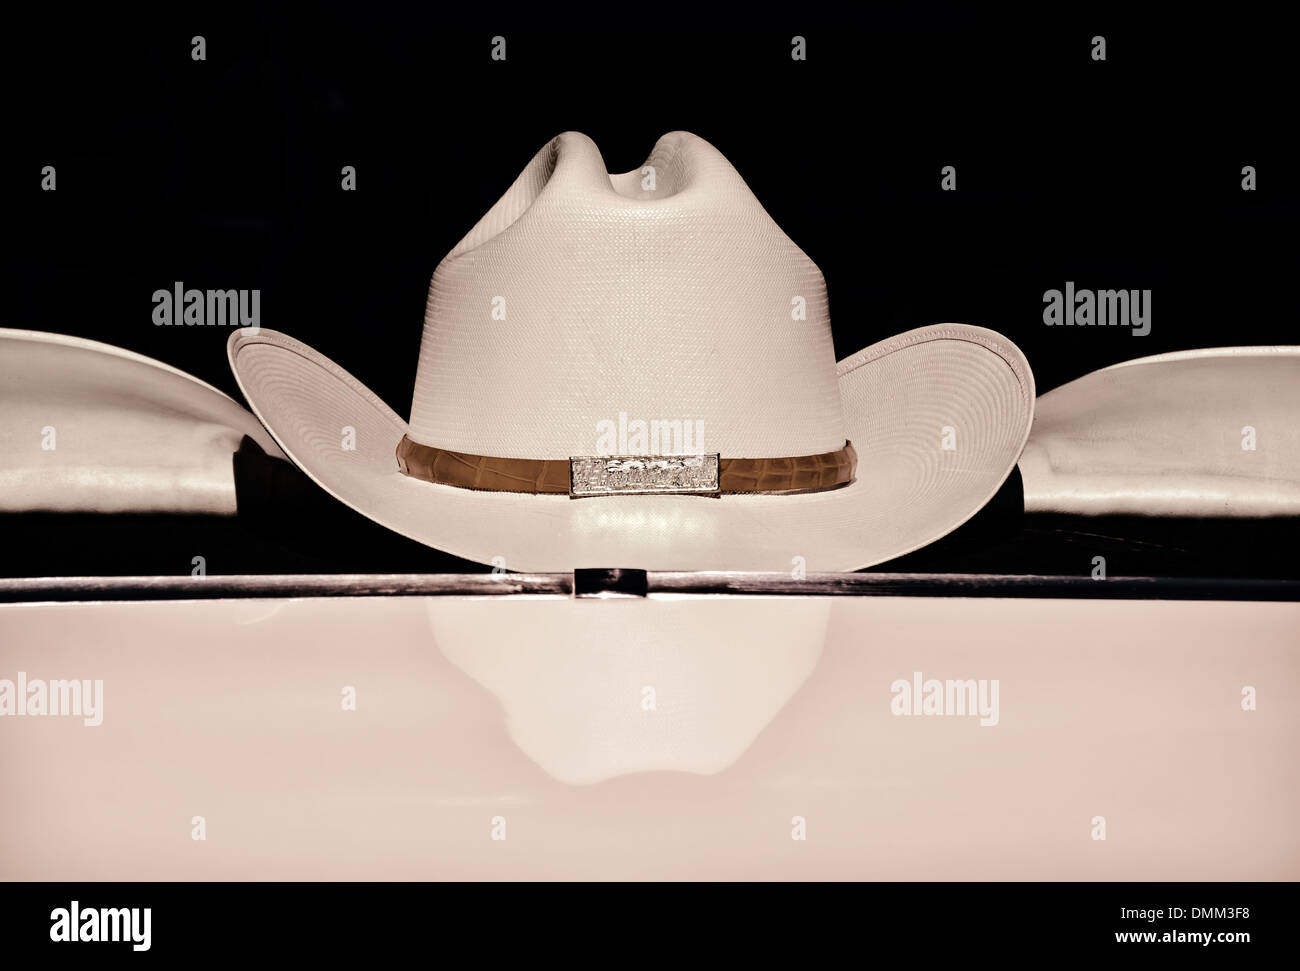 Cowboy hat displayed on the back of a car window against dark background, sepia color Stock Photo